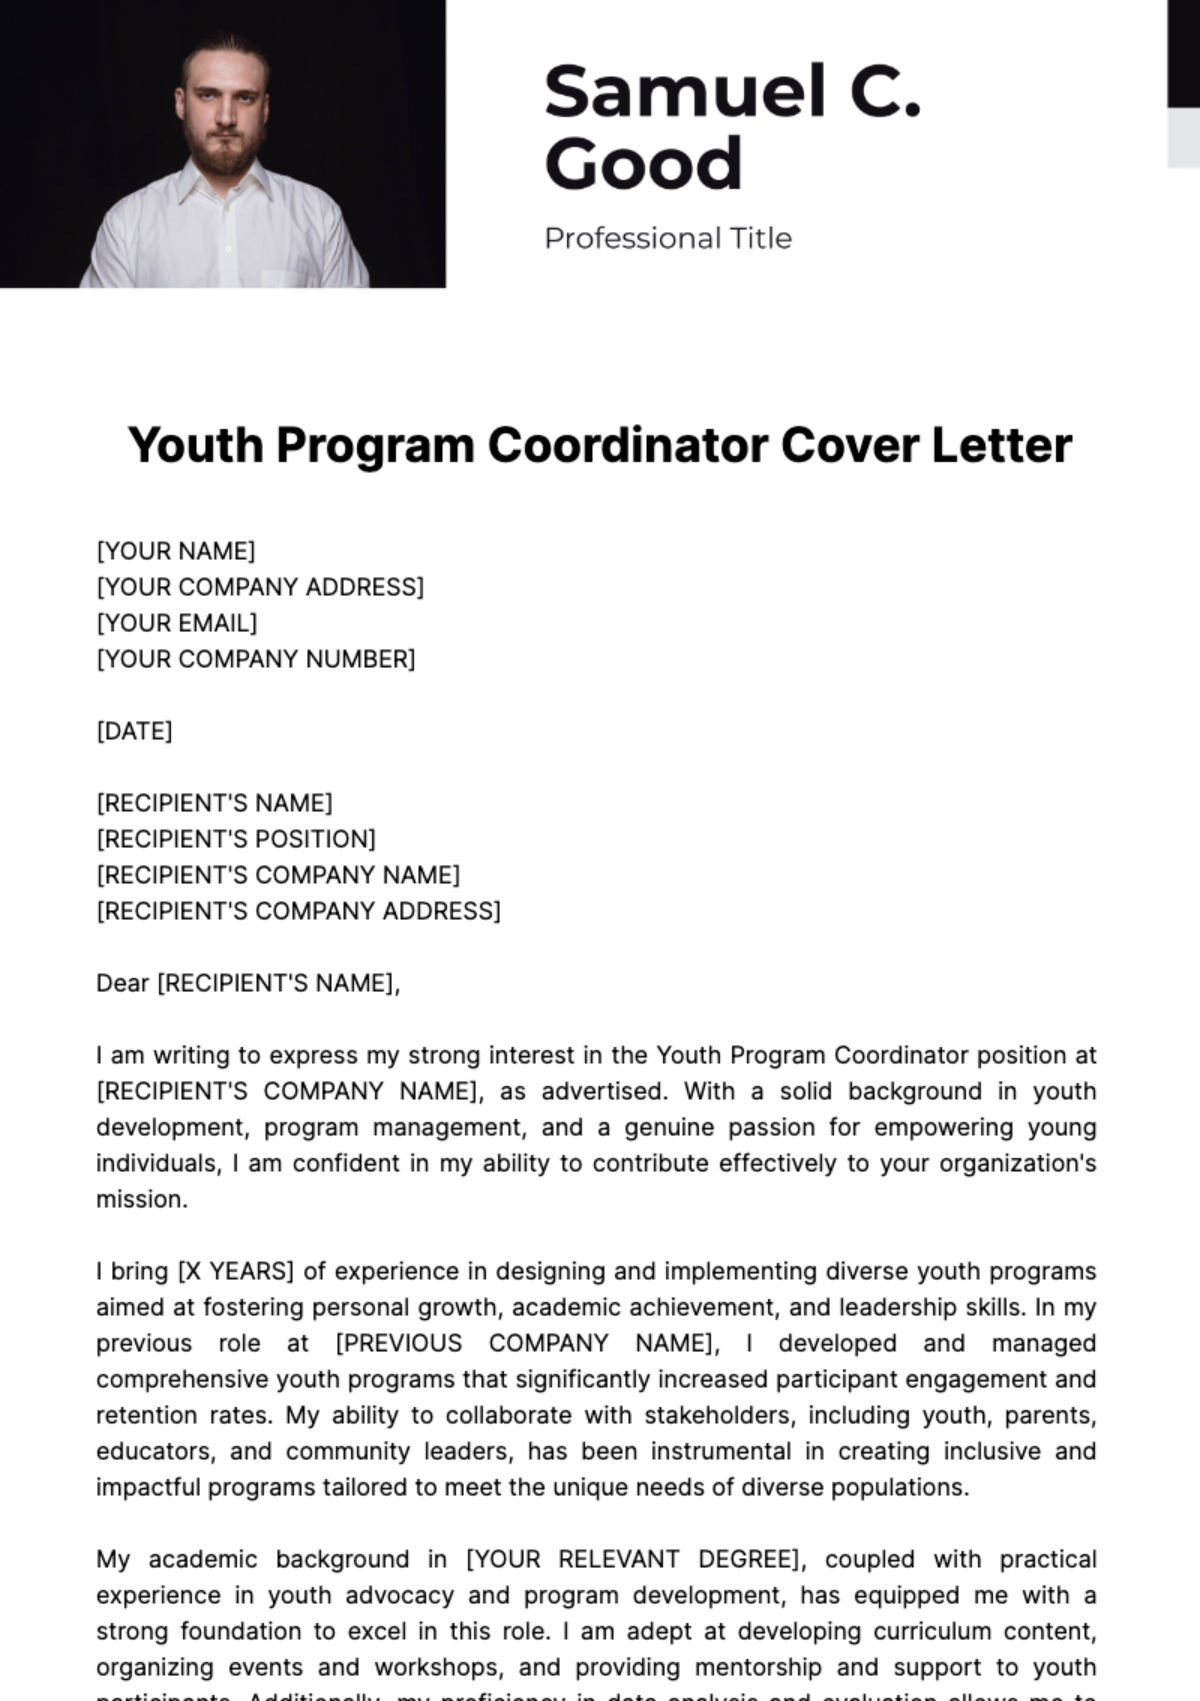 Free Youth Program Coordinator Cover Letter Template